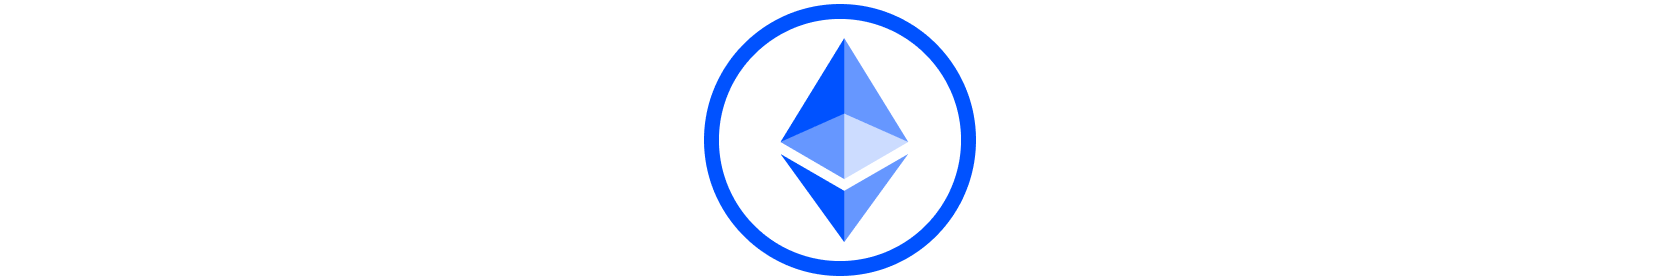 Staked ETH: 1.1m   Market share: 11.88%   30d change: -1.71%